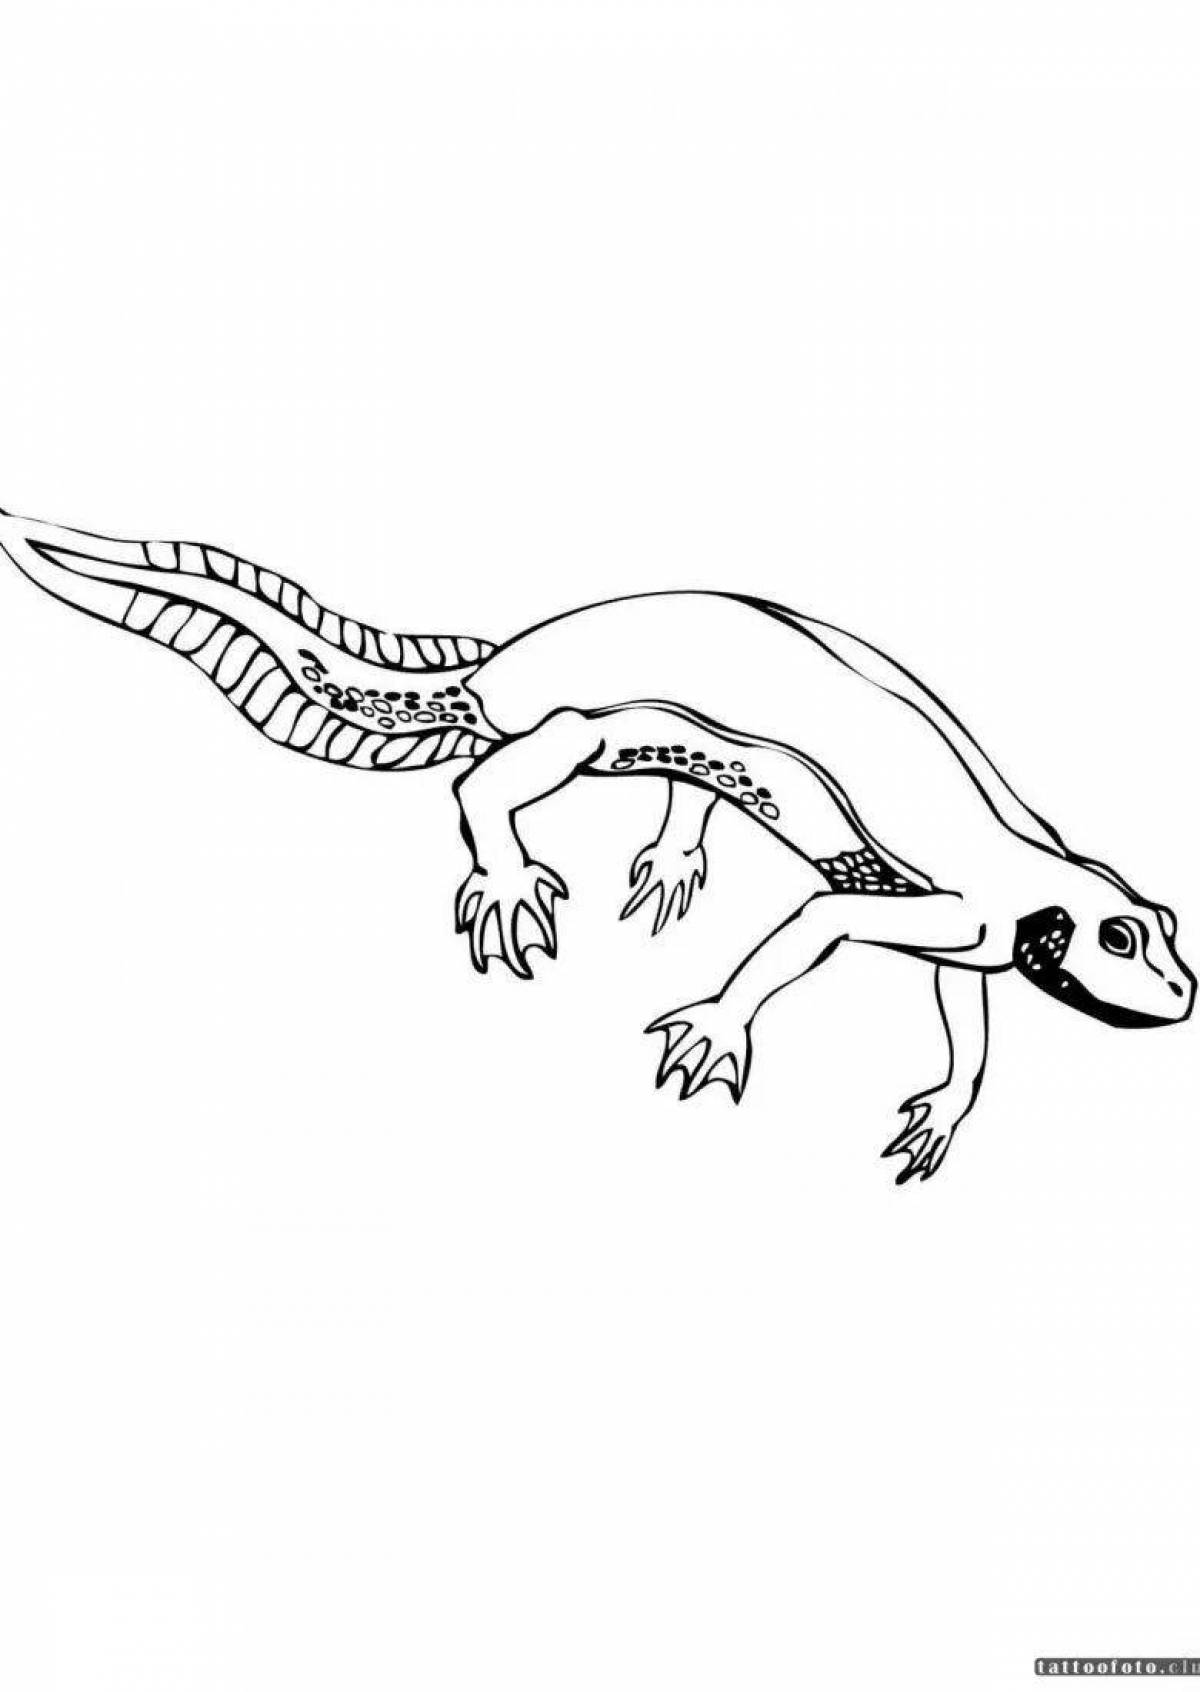 Fun coloring of the common newt